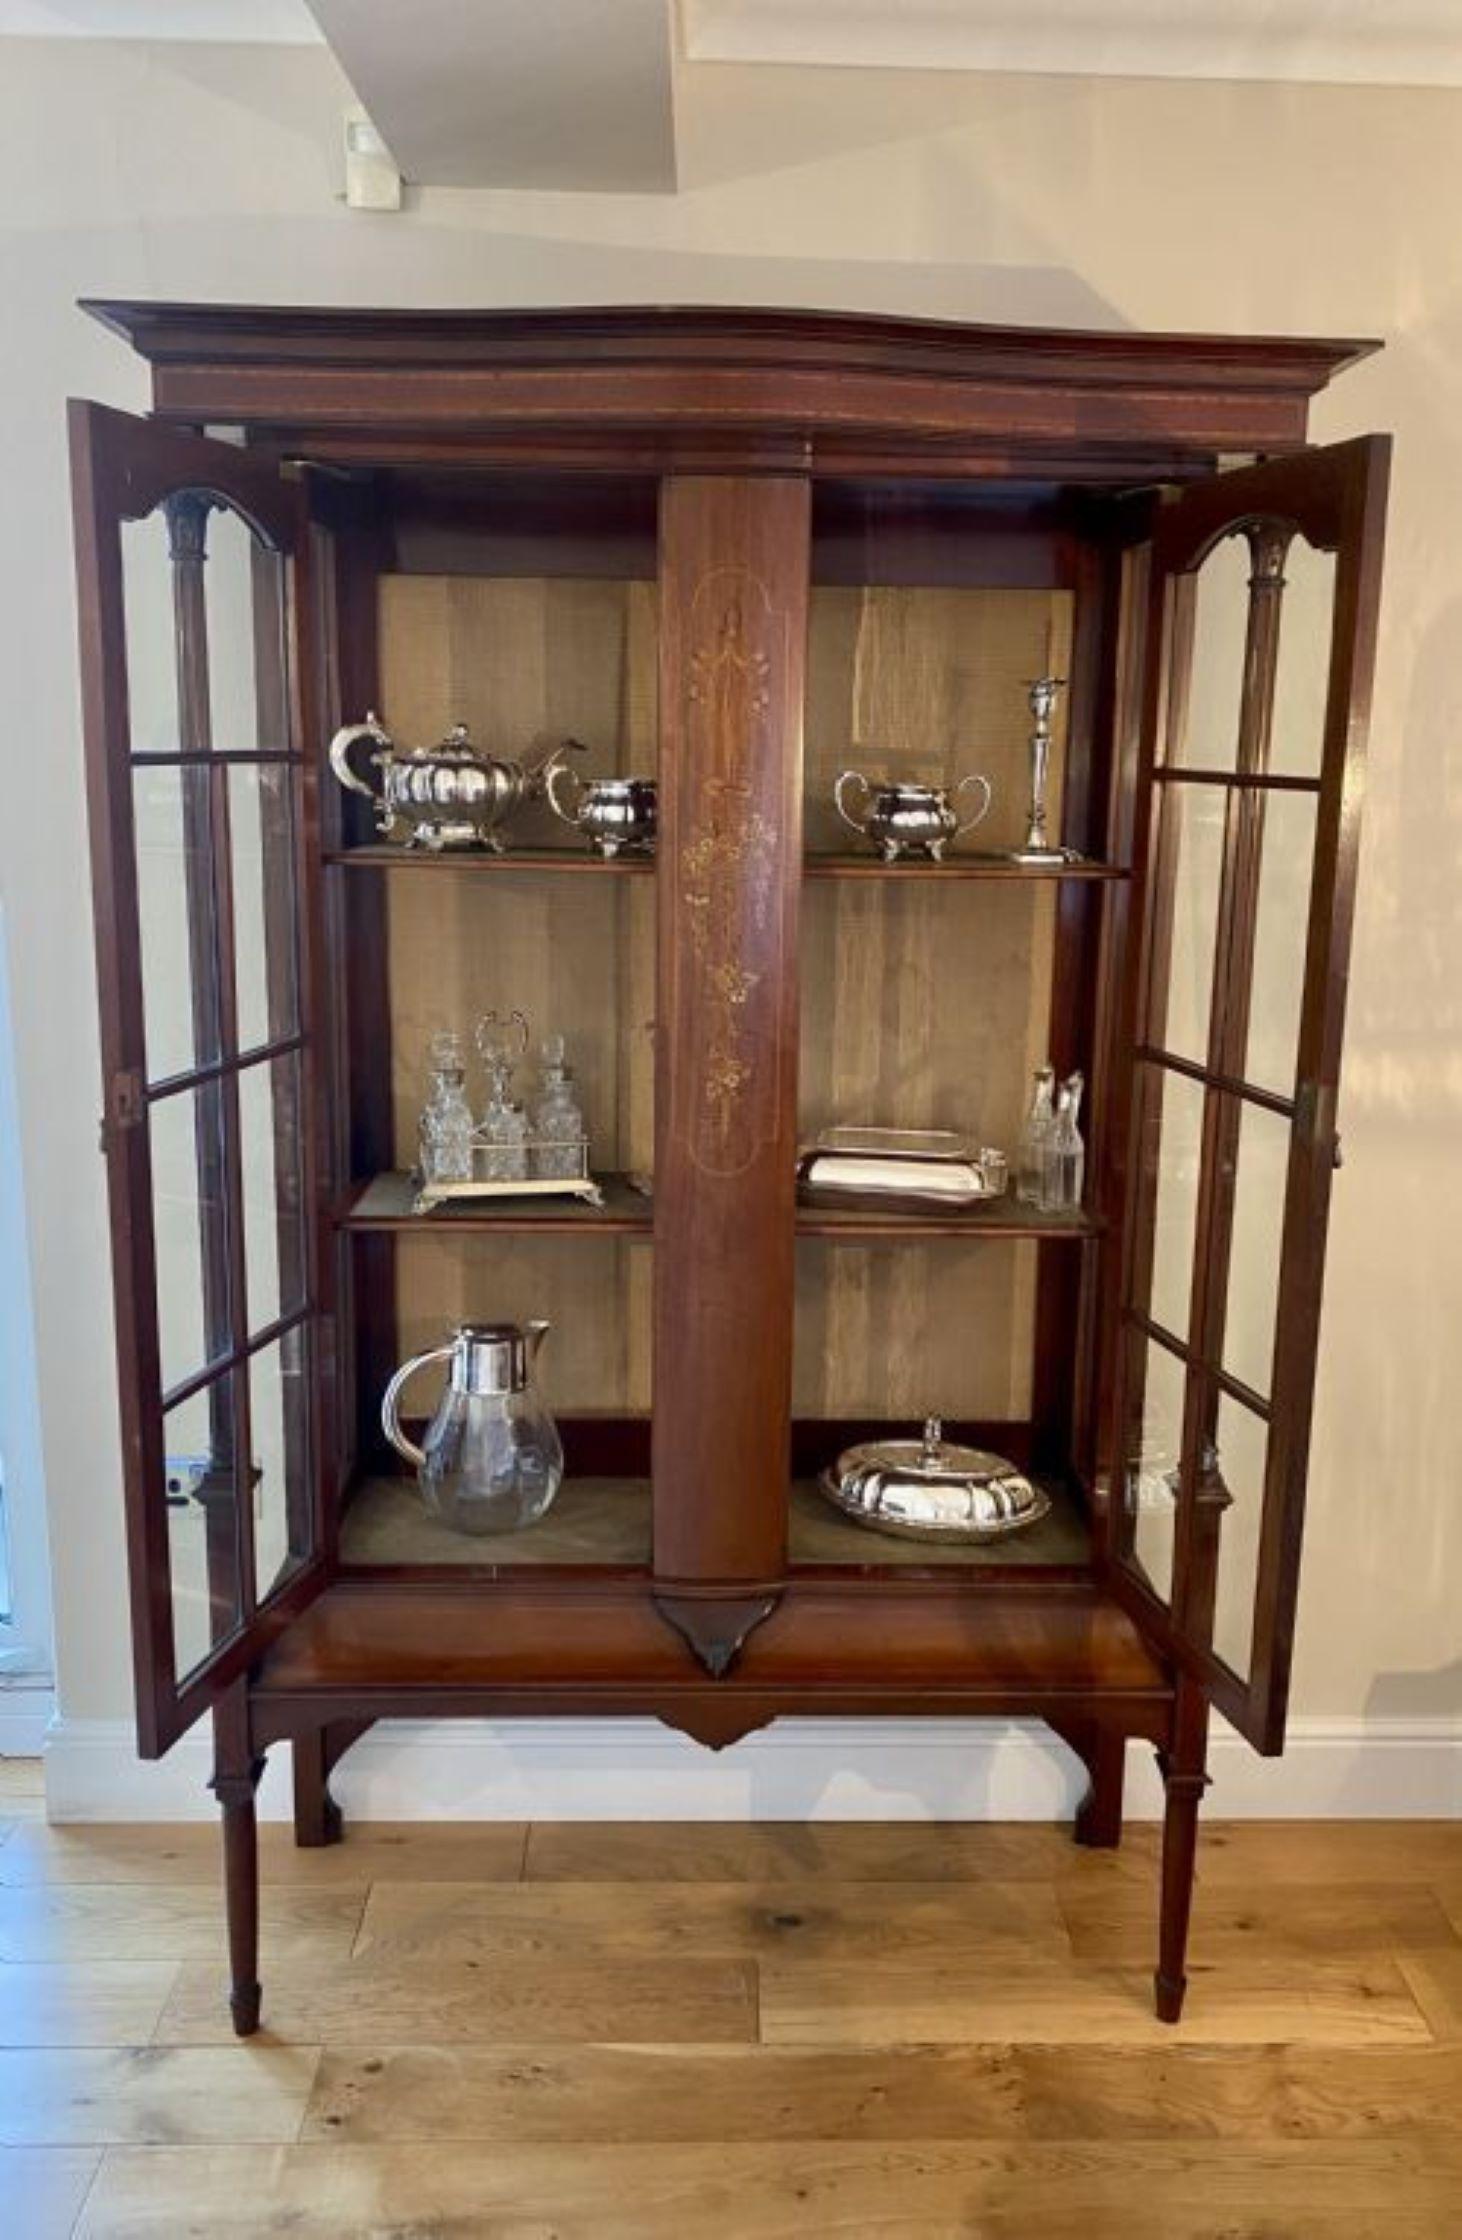 Quality antique Edwardian mahogany inlaid display cabinet having a quality inlaid serpentine shaped cornice above a fantastic marquetry inlaid center panel flanked by a pair of astral glazed doors opening to reveal tow display shelves, two superb